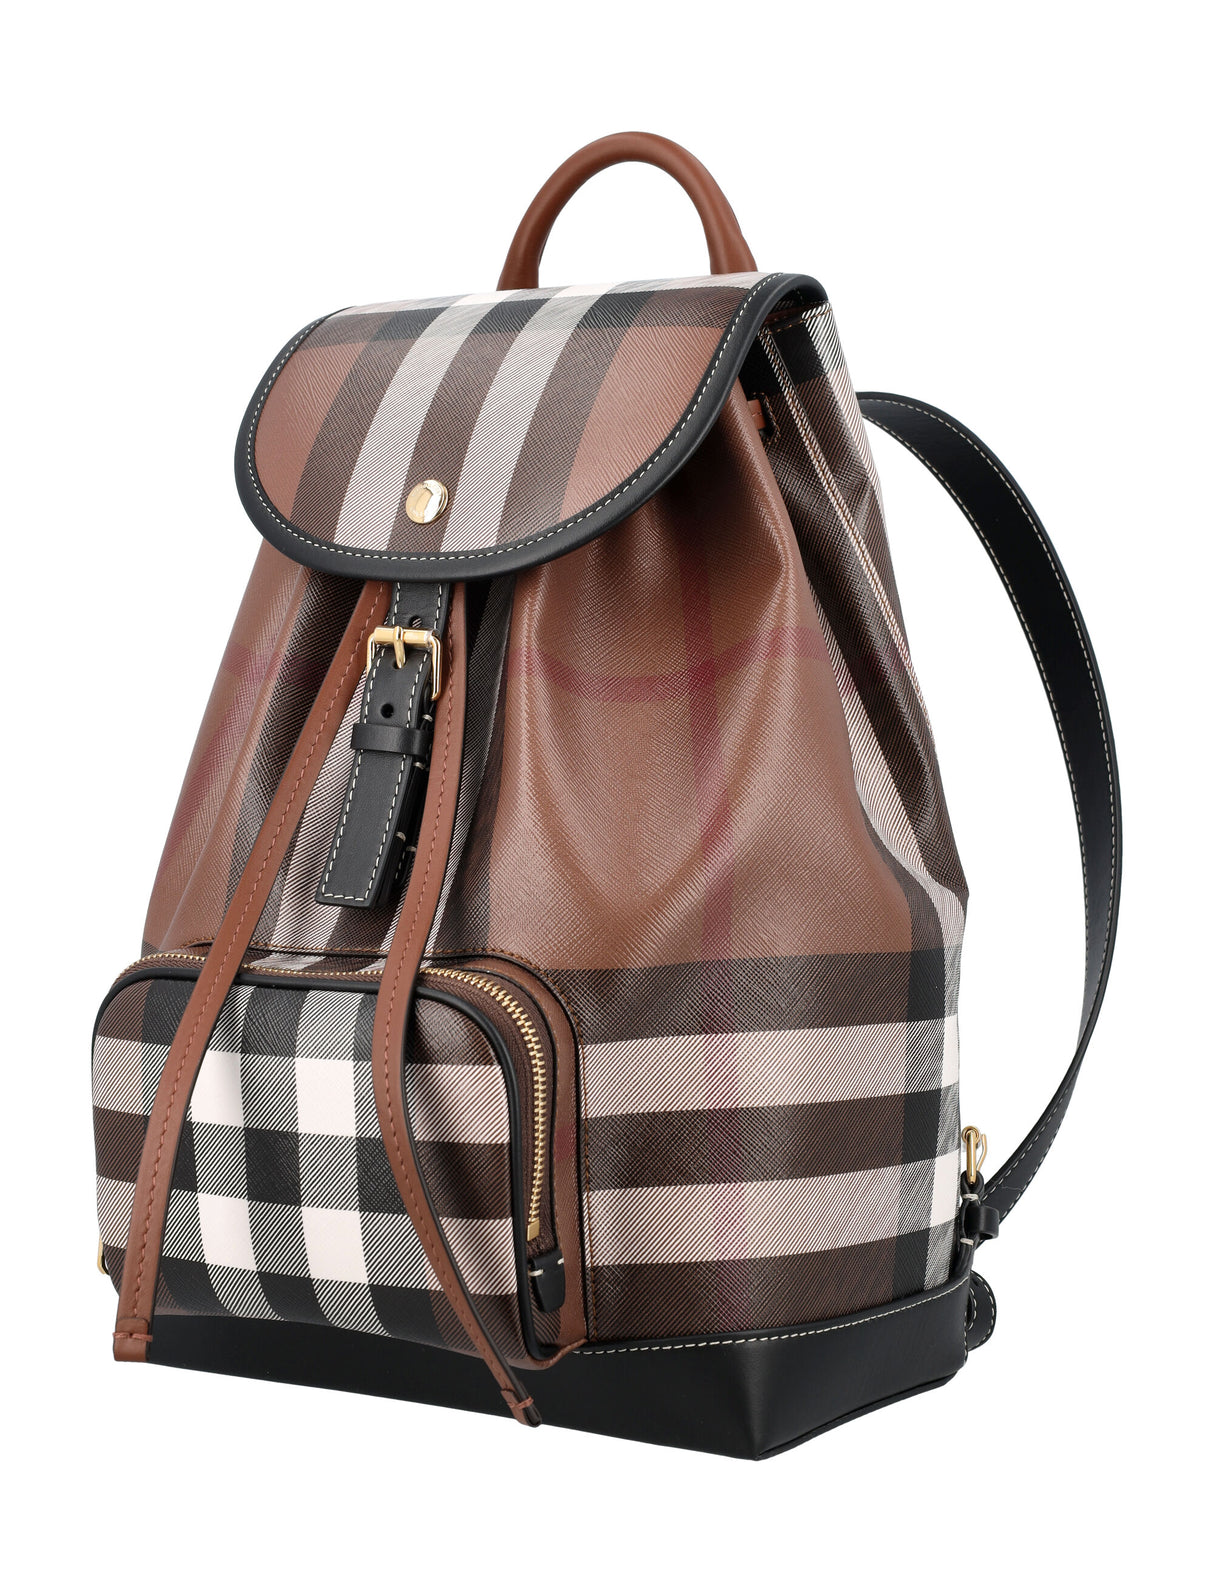 BURBERRY Iconic Check Pattern Medium Backpack with Leather Accents, Snap Closure, and Interior Pocket - Brown